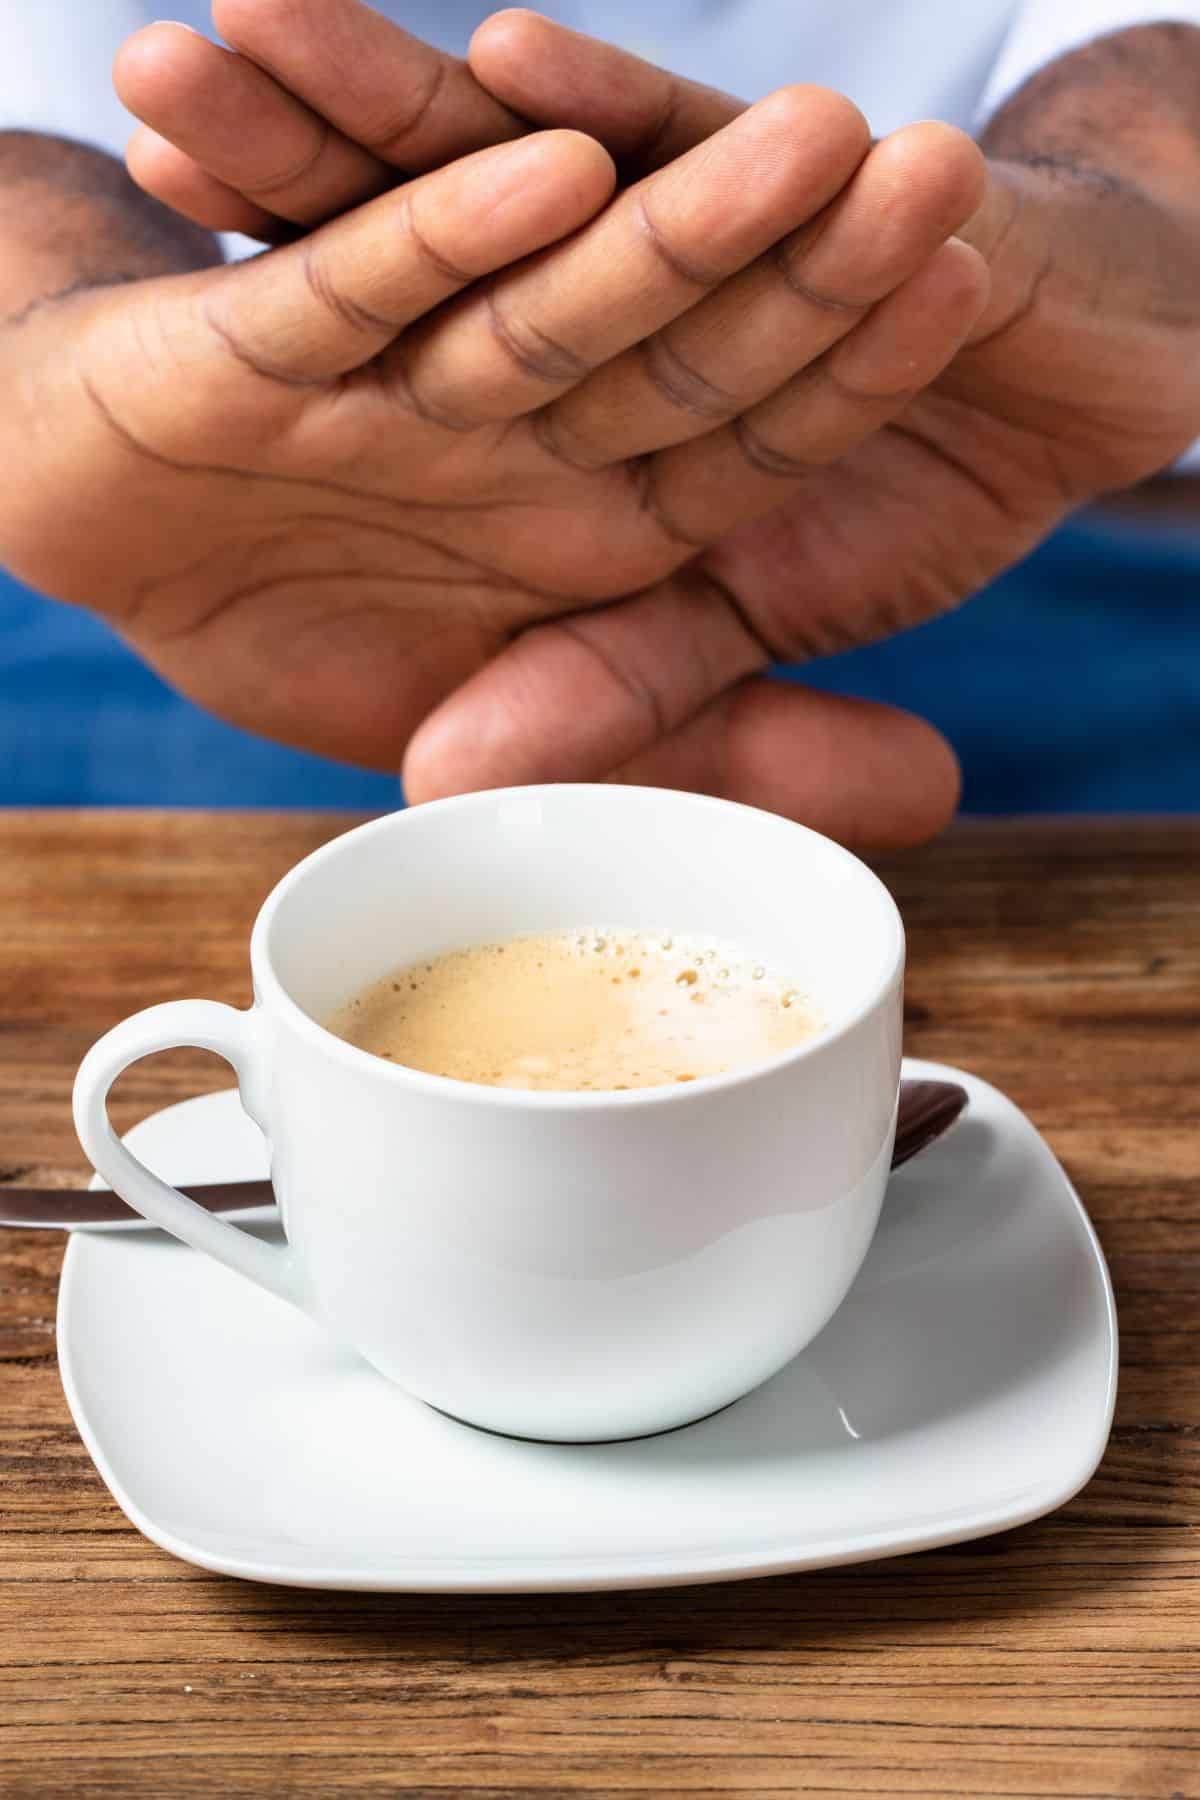 two hands crossed in front of a mug of coffee.